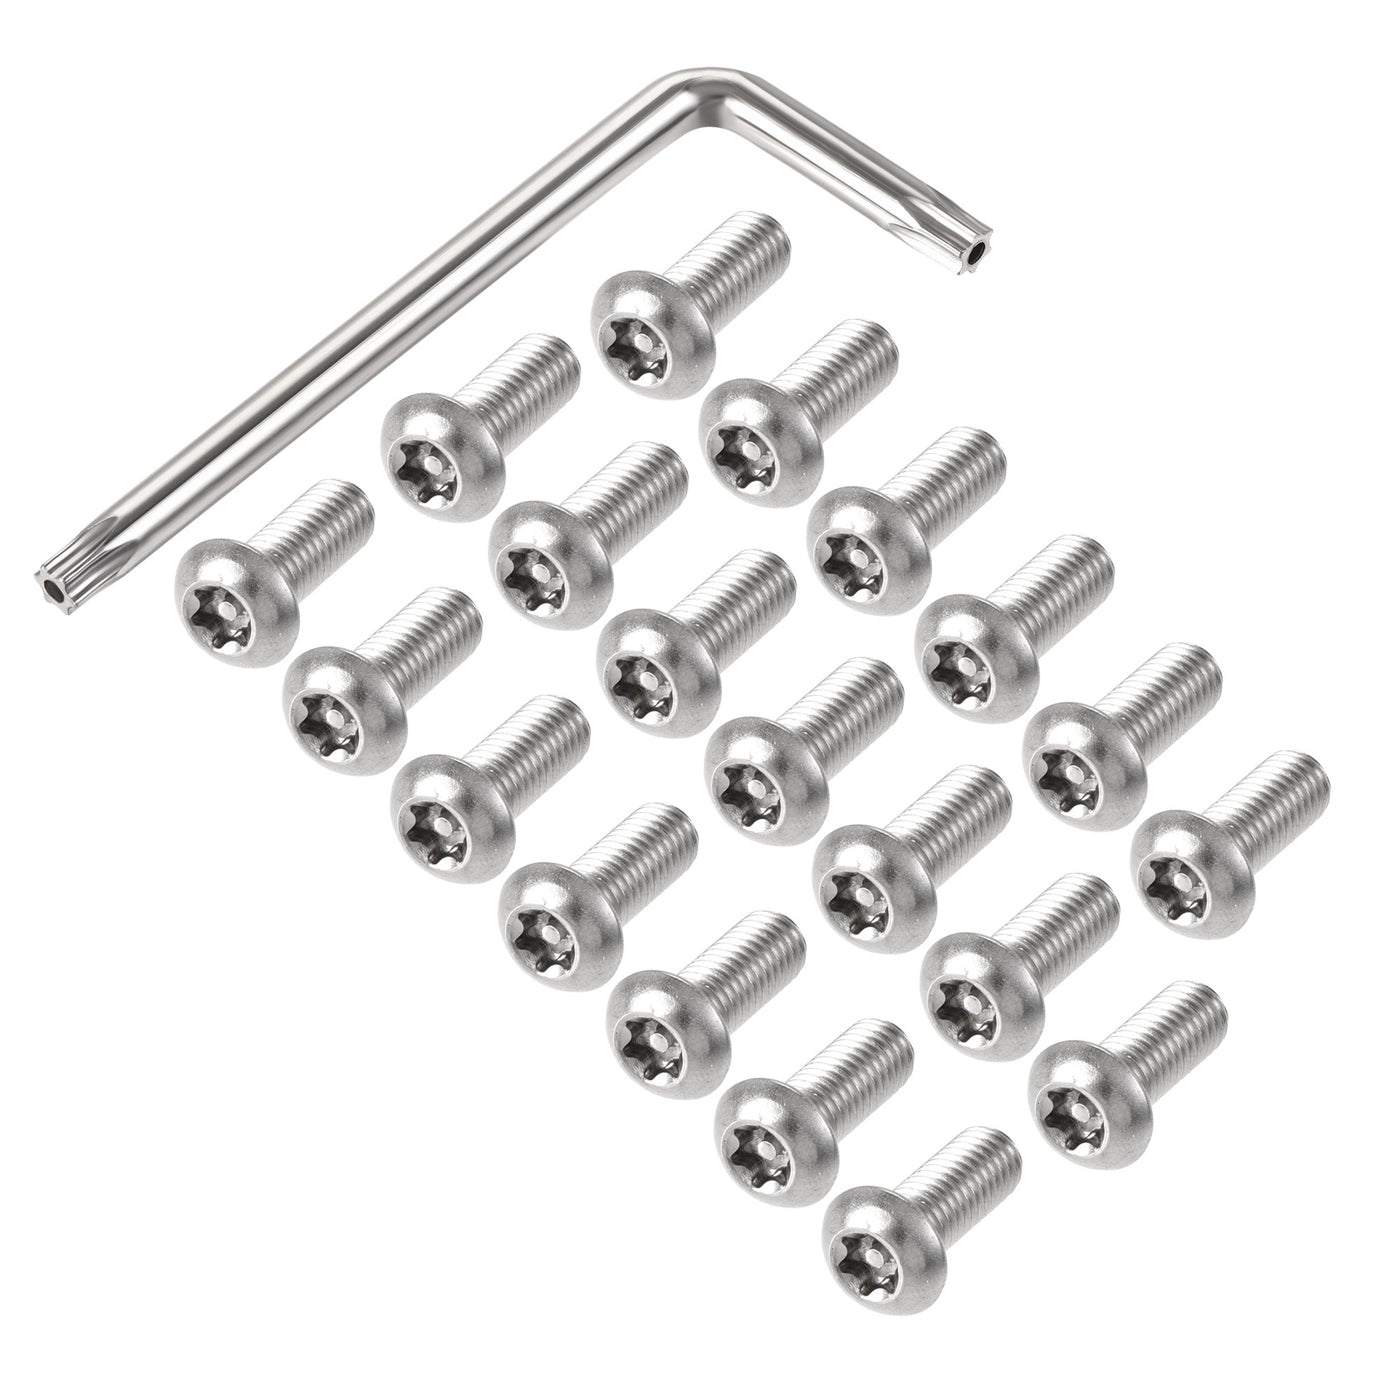 uxcell Uxcell M8x20mm Torx Security Machine Screw, 20pcs Pan Head Screws Inside Column, with T40 L-Type Wrench, 304 Stainless Steel Fasteners Bolts